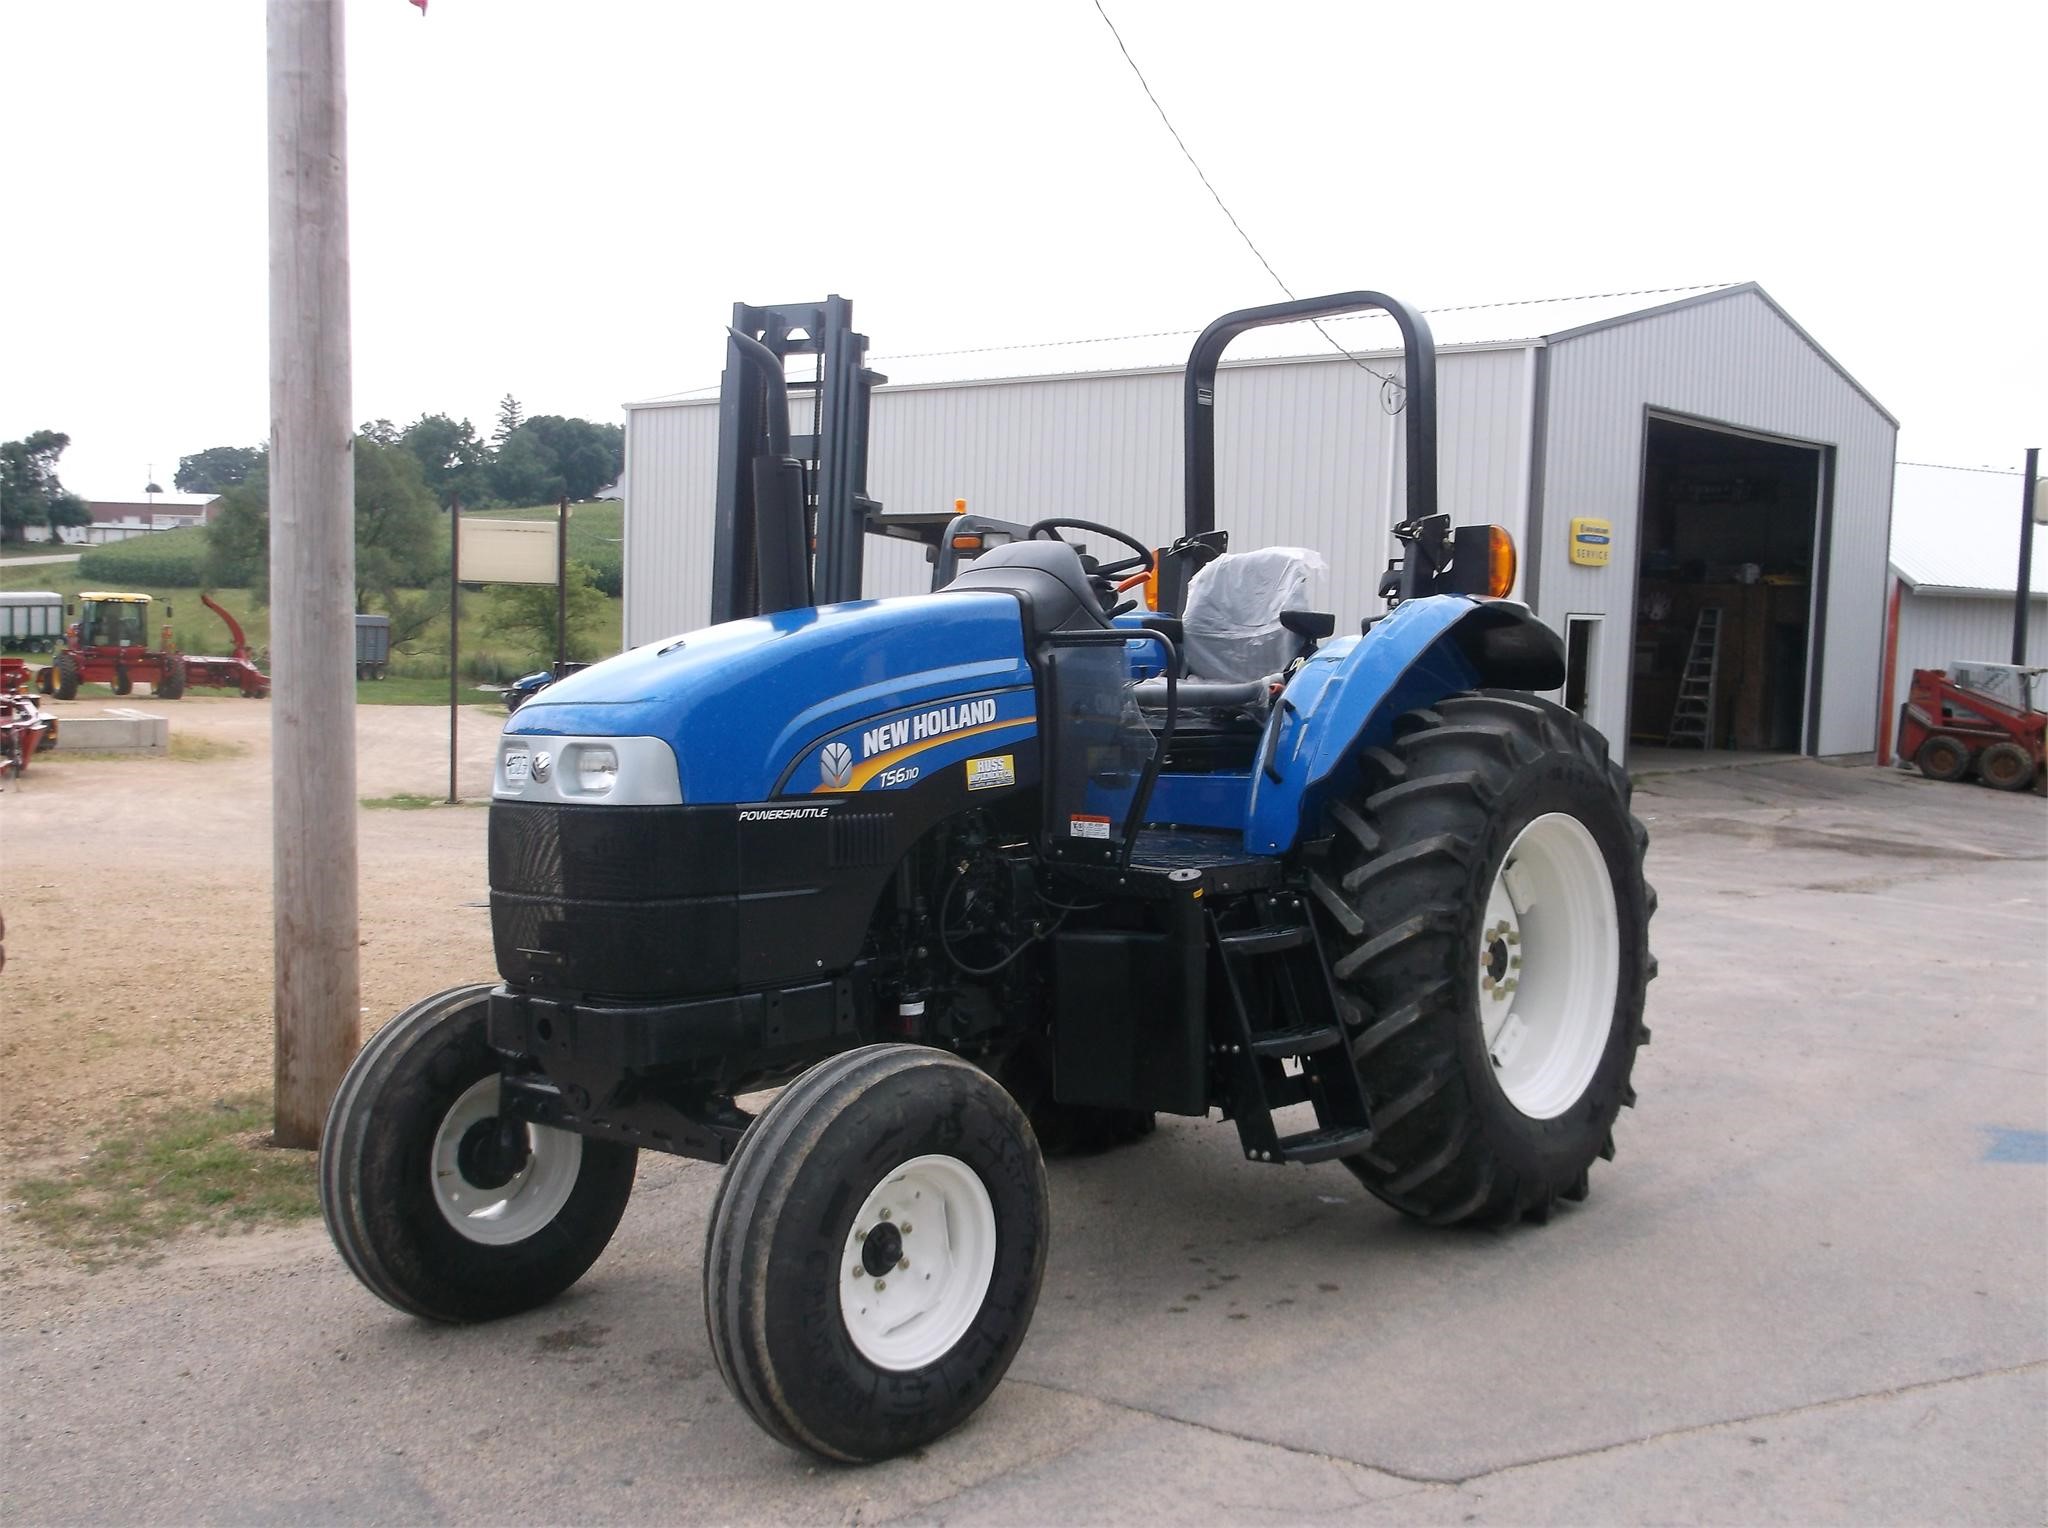 Wisconsin Ag Connection - NEW HOLLAND TS6.110 100-174 HP Tractors for sale